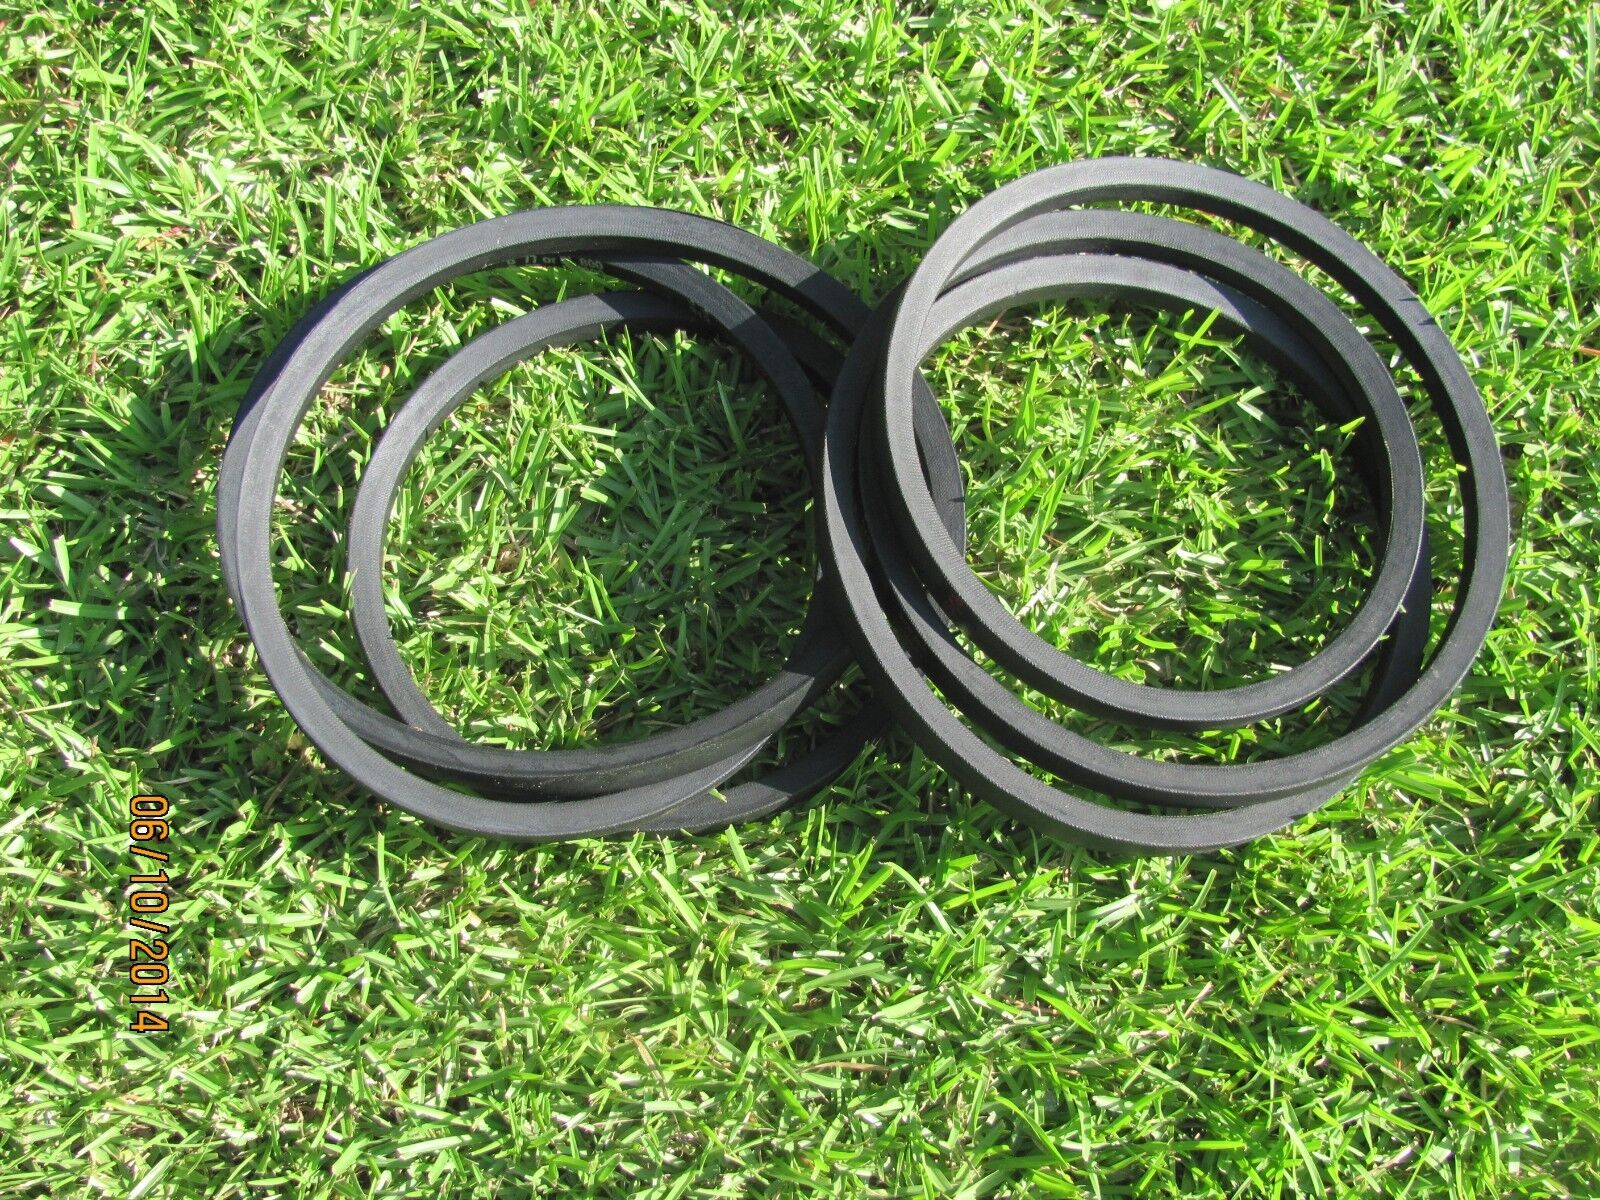 2 REPLACEMENT BELTS FOR SERVIS RHINO FM84A 7' MOWERS ALAMO 00778227 778227